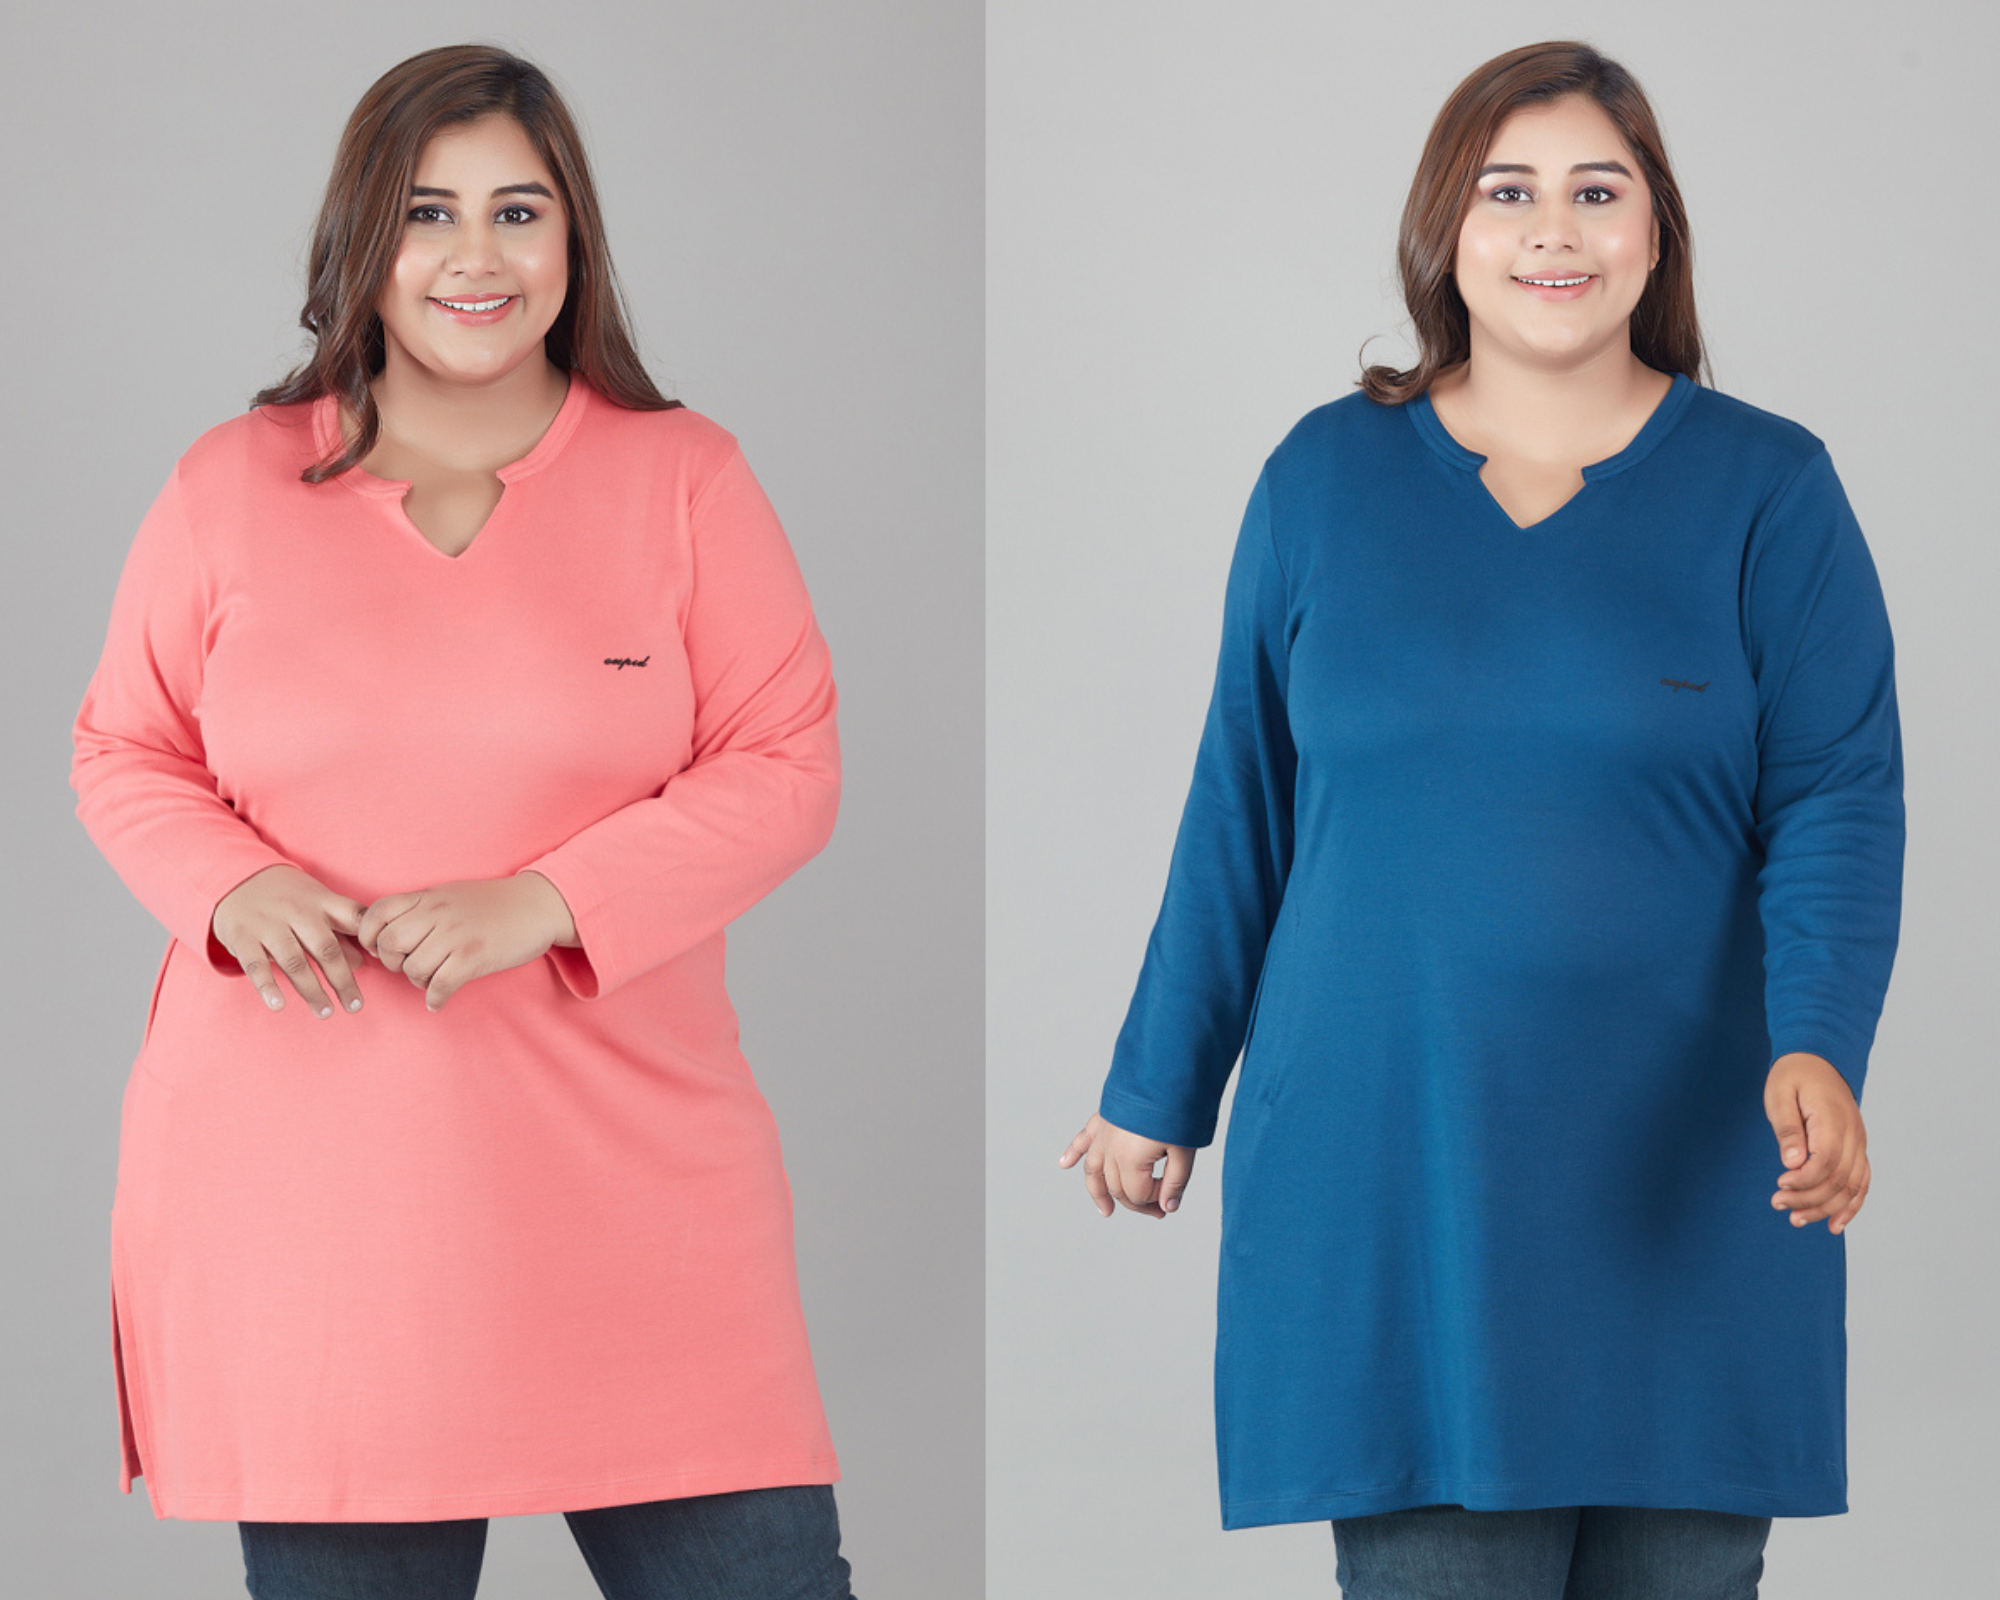 Plus Size Full Sleeves Long Tops For Women - Pink & Blue